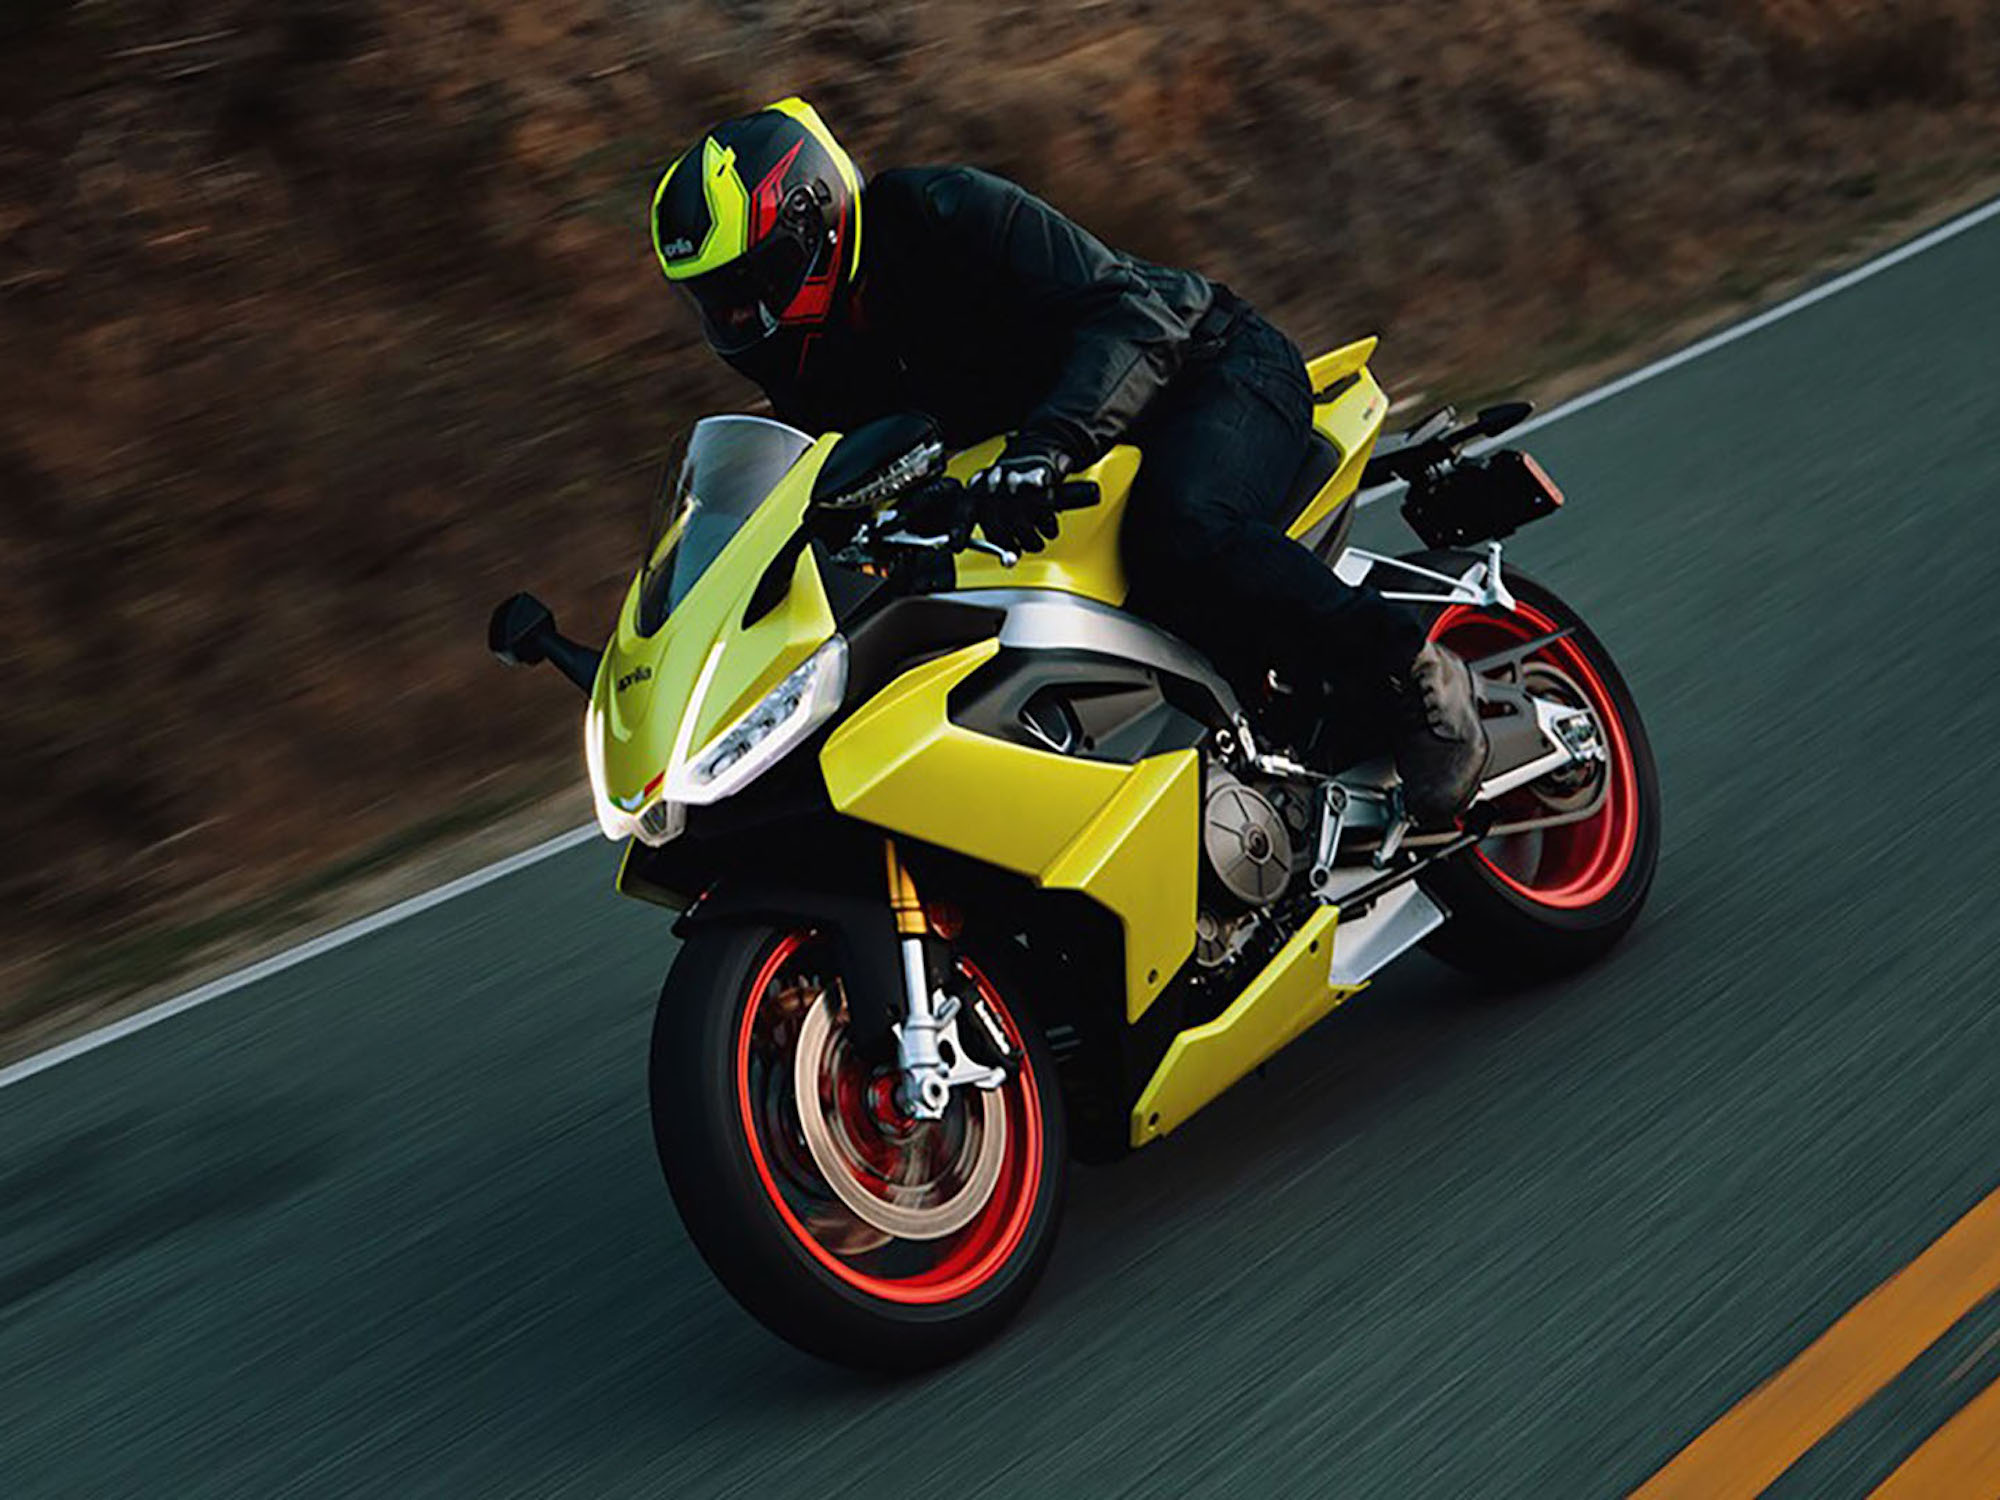 Aprilia's RS 660, embedded in commemoration of a similarly-styled sport bike debut on September 7th. Media sourced from Fort Myers' Haus of Bikes.